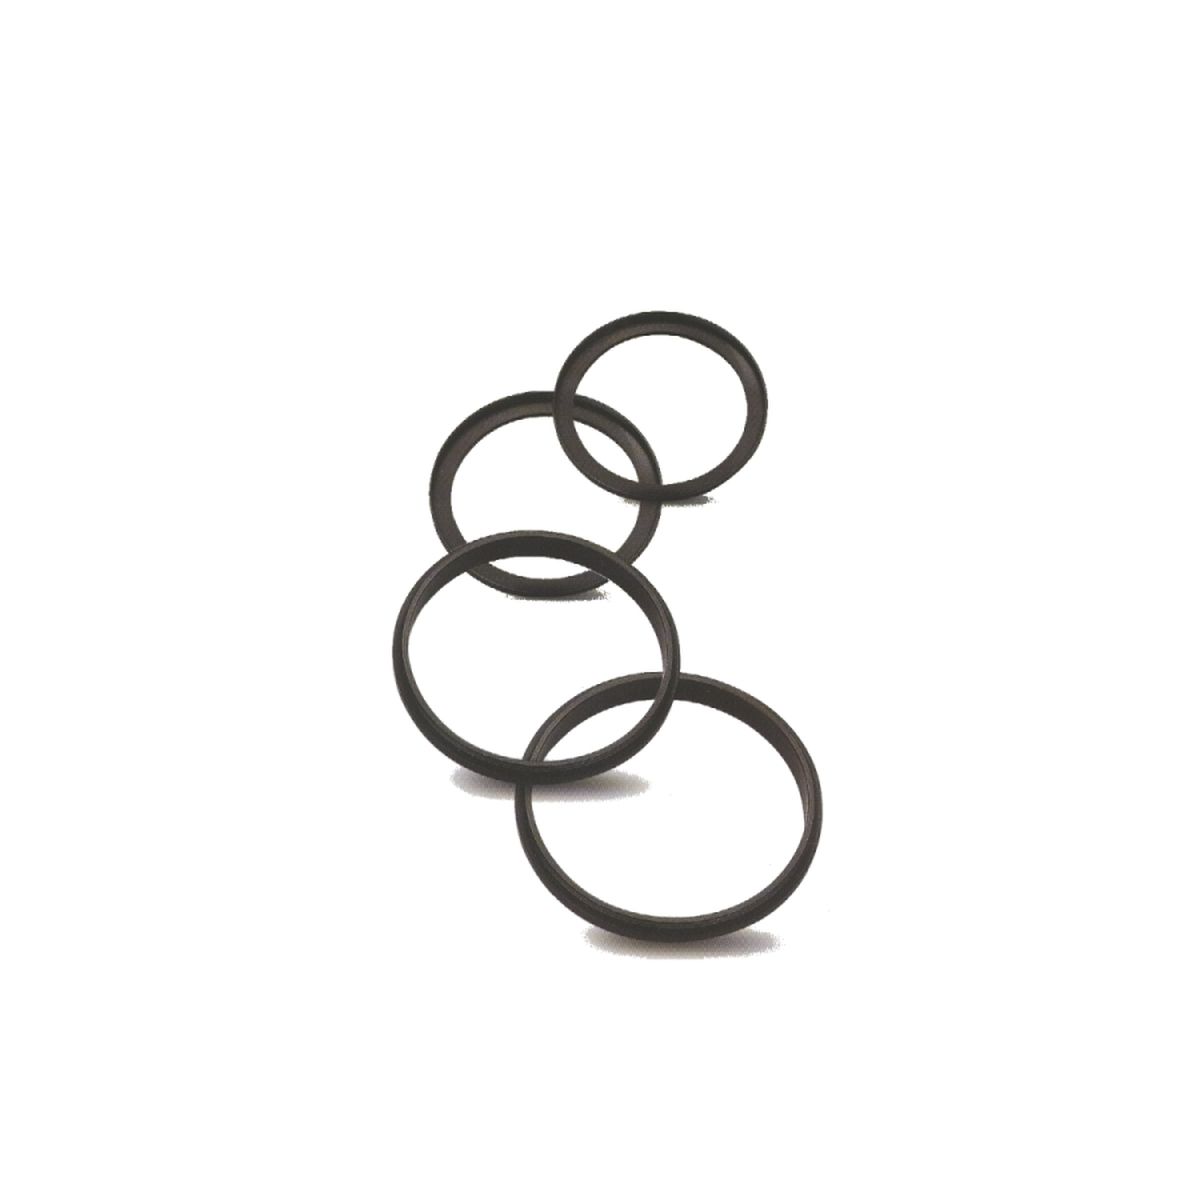 Caruba Step-up/down Ring 72mm - 52mm